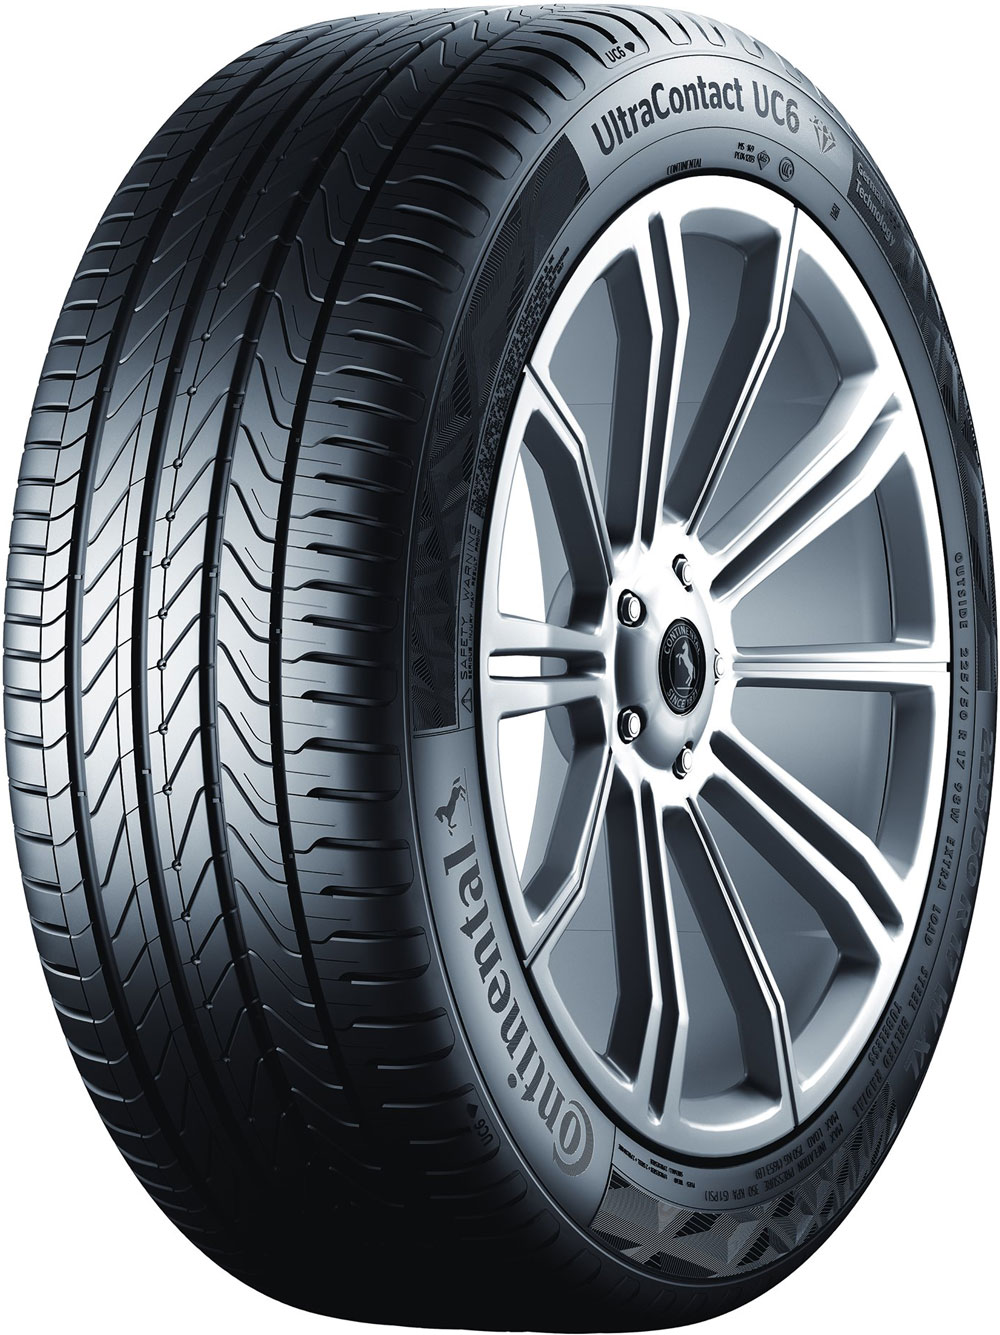 Anvelope auto CONTINENTAL UCXLFR XL 205/40 R17 84V